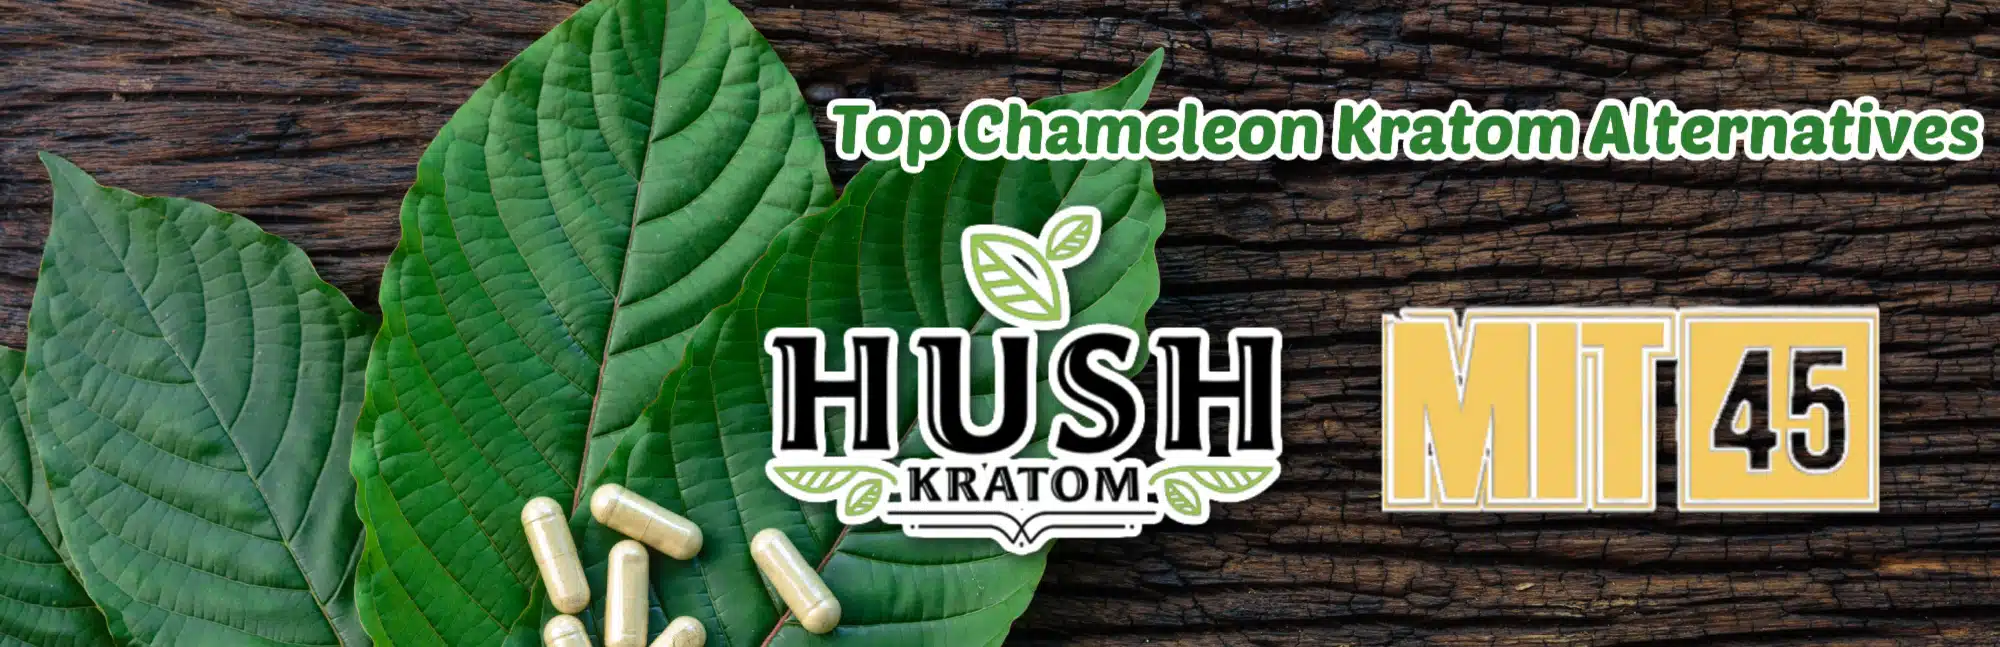 "Top chameleon kratom alternatives" banner with Hush and MIT45 company logos